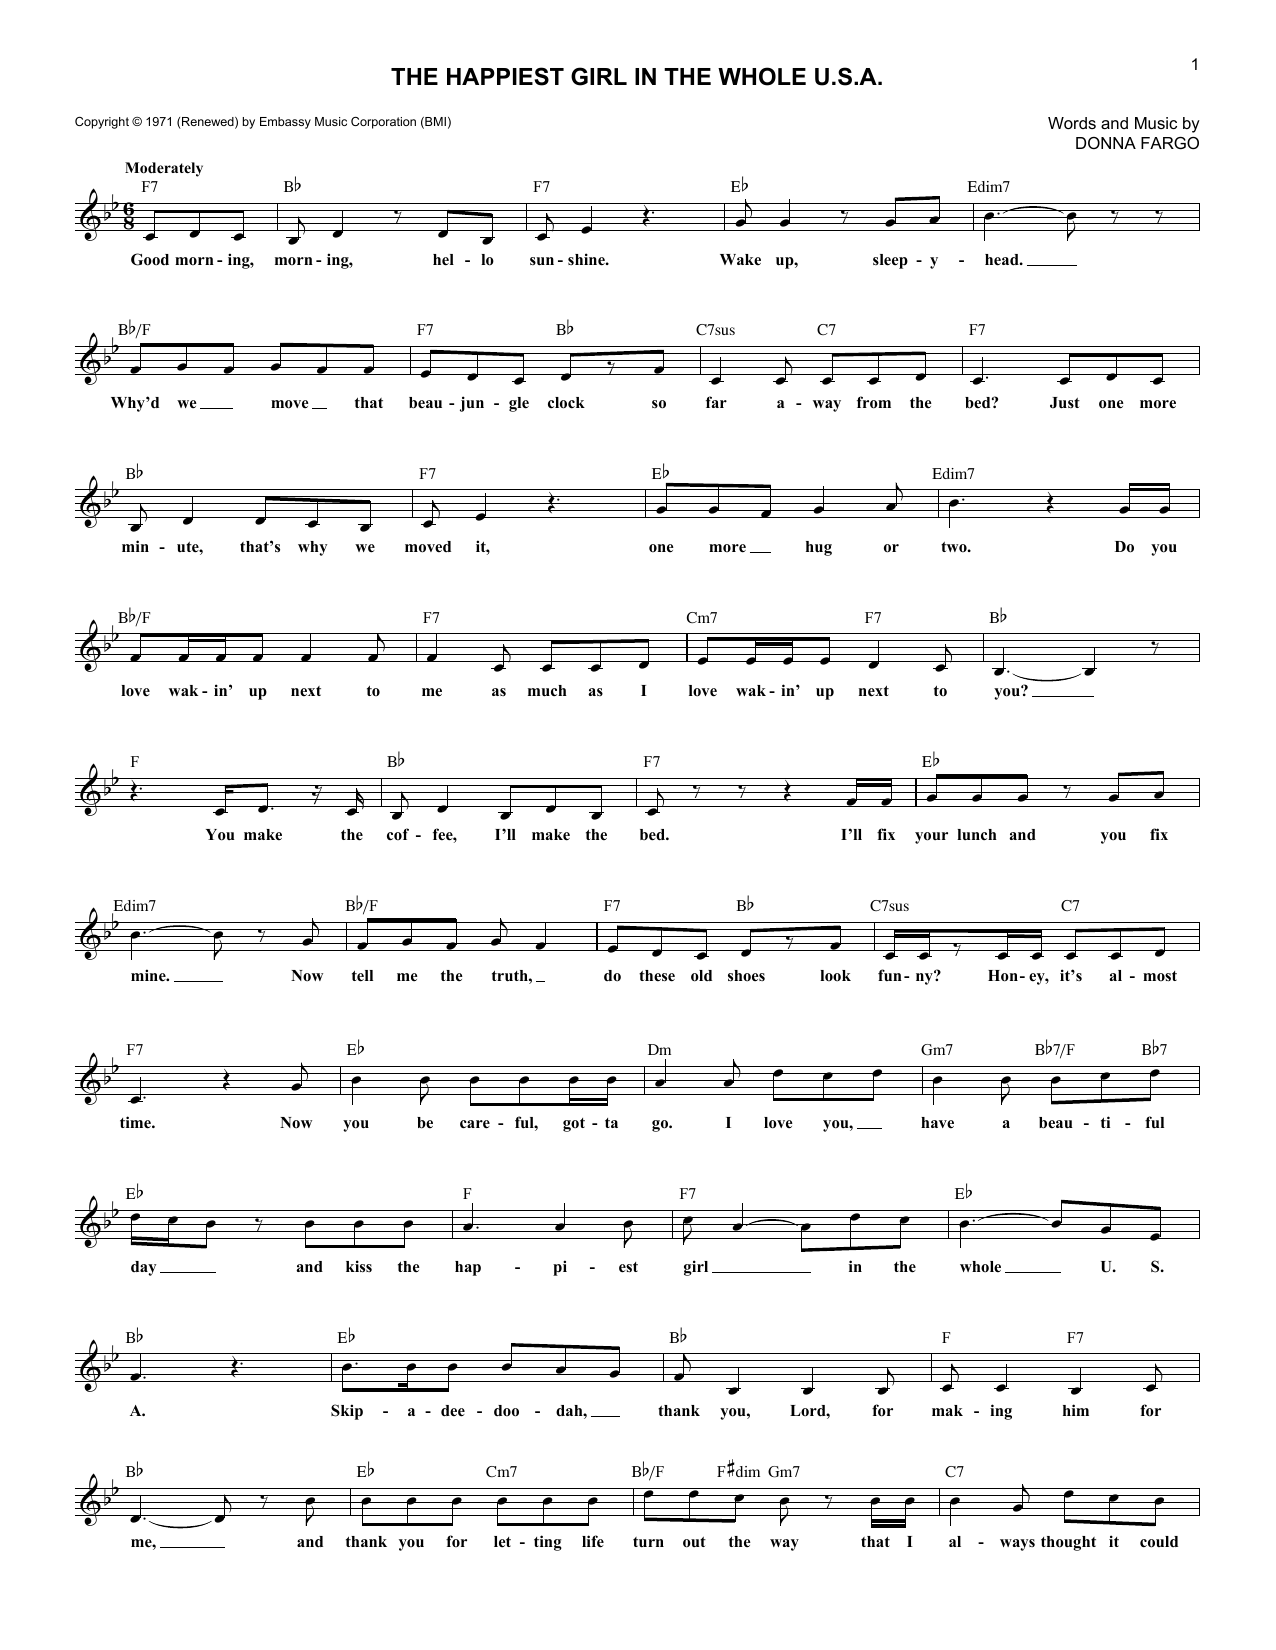 Download Donna Fargo The Happiest Girl In The Whole U.S.A. Sheet Music